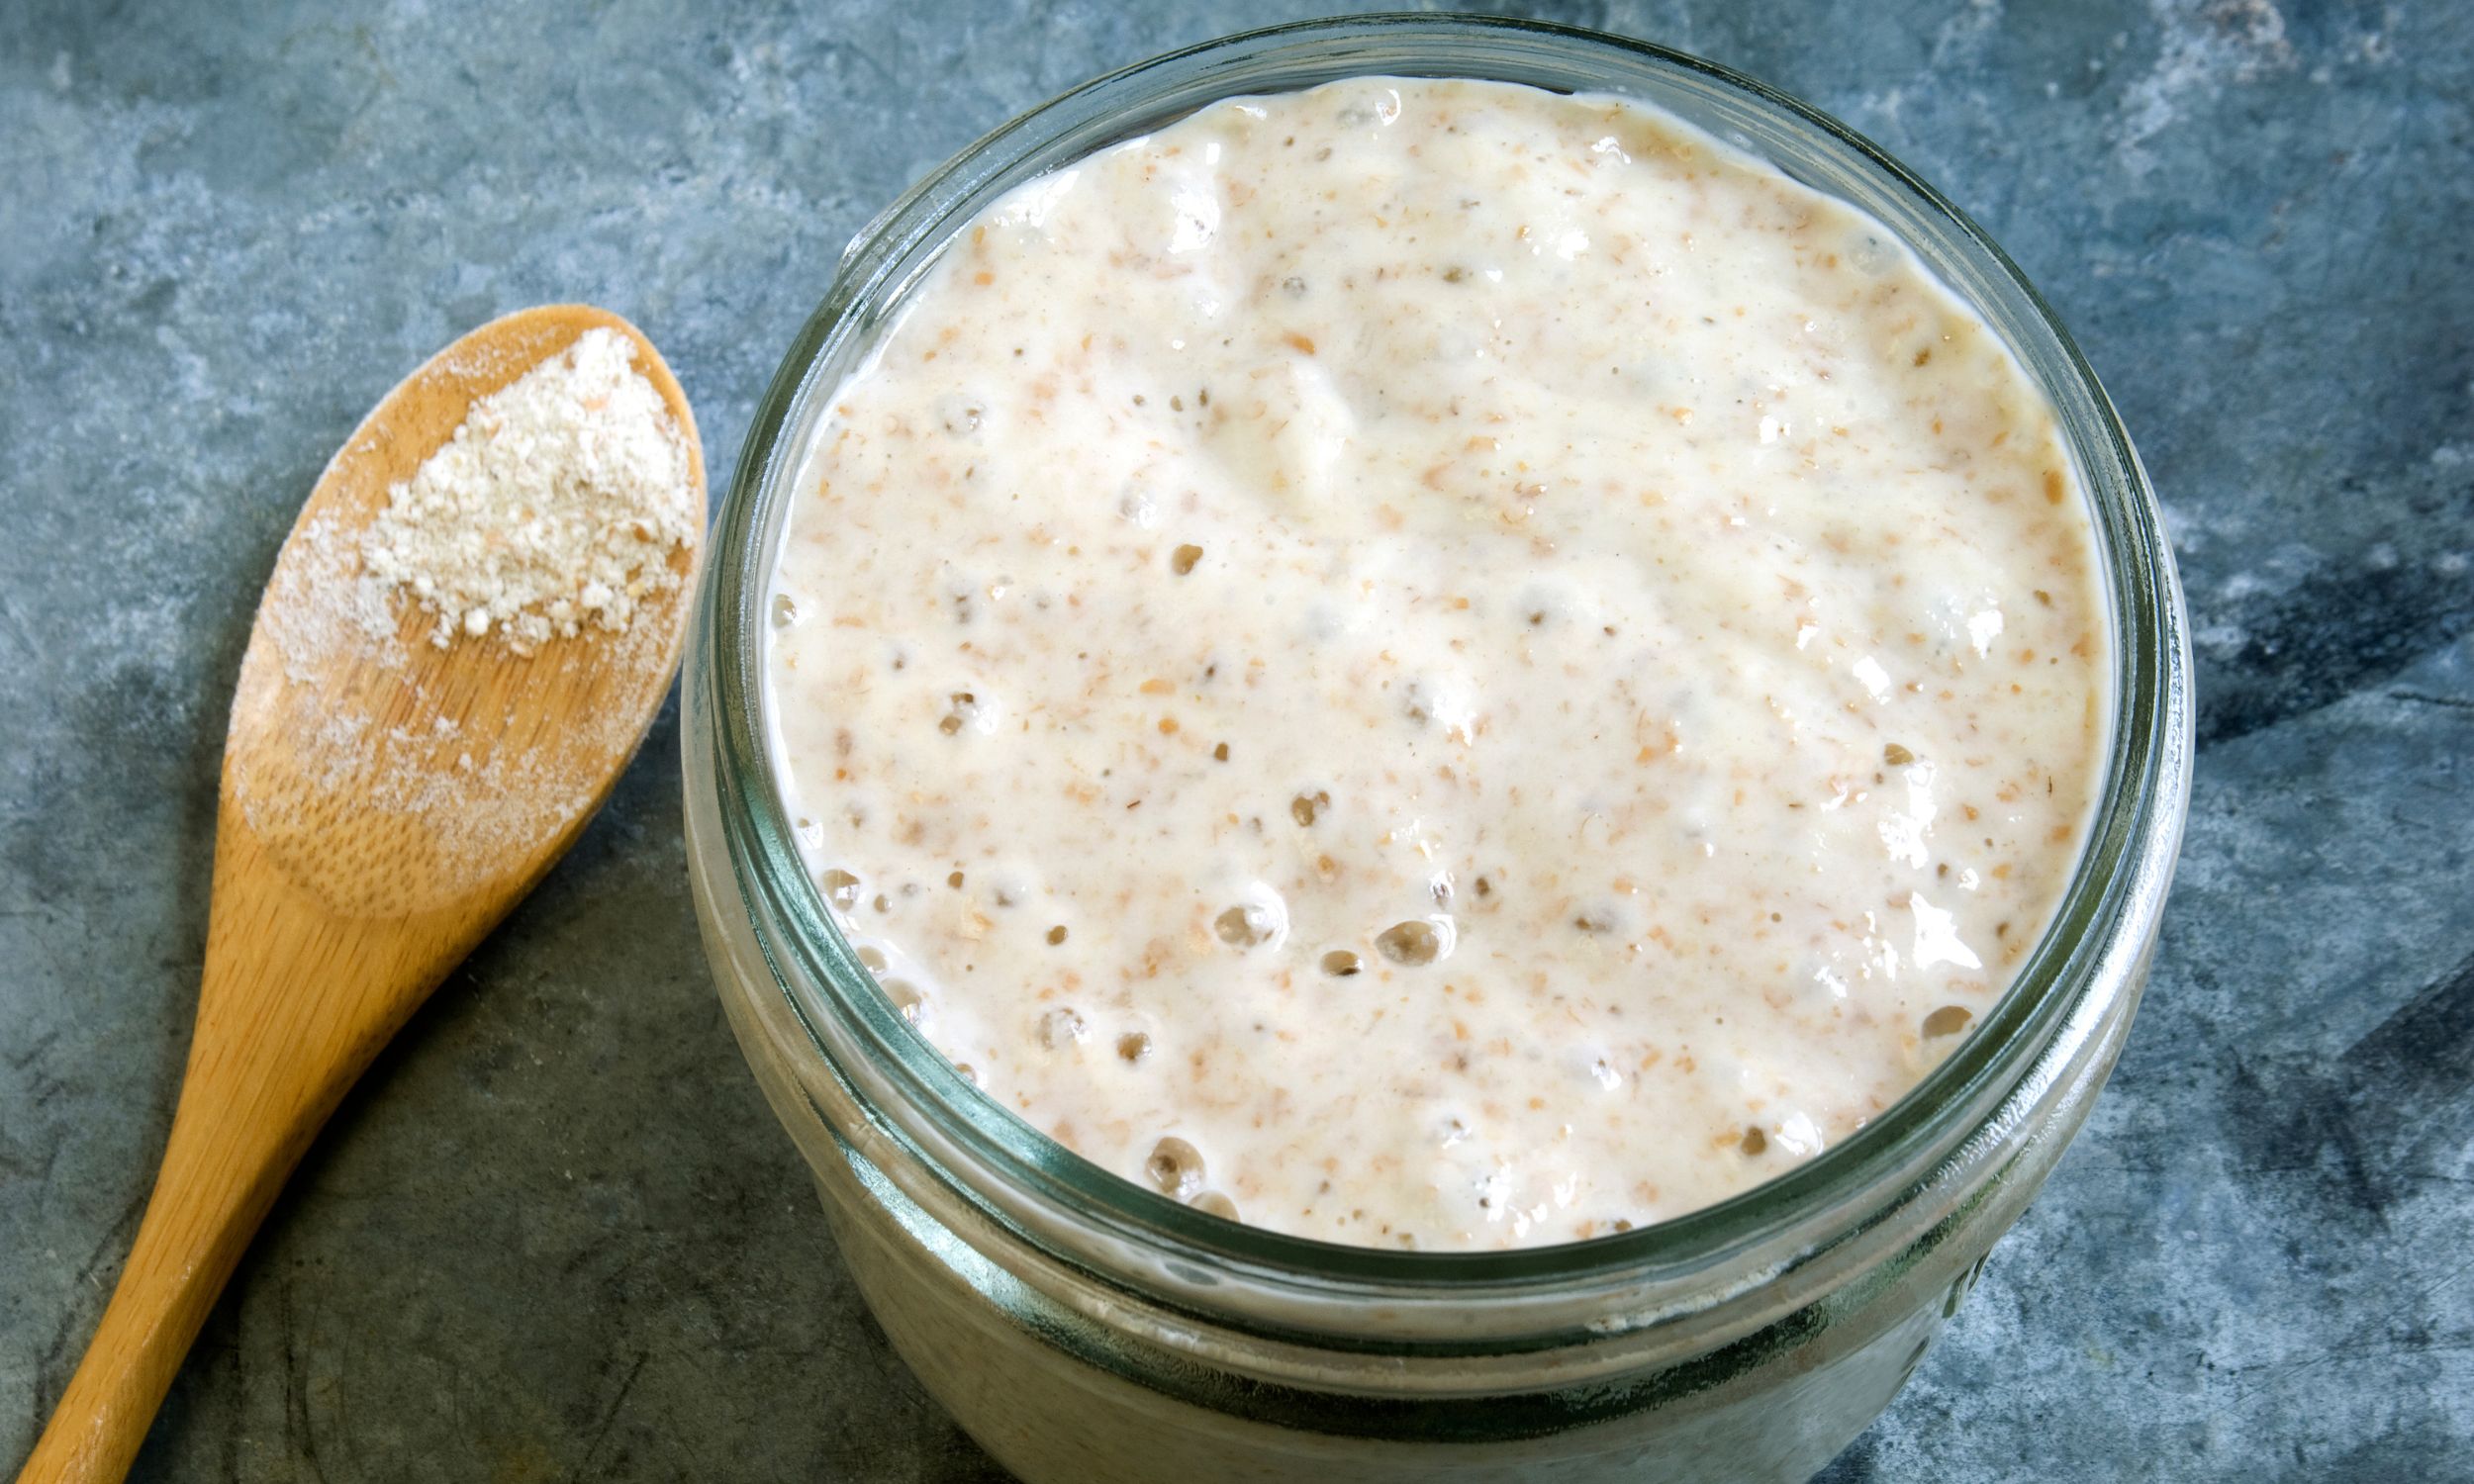 Should Sourdough Starter be Used at its Peak?